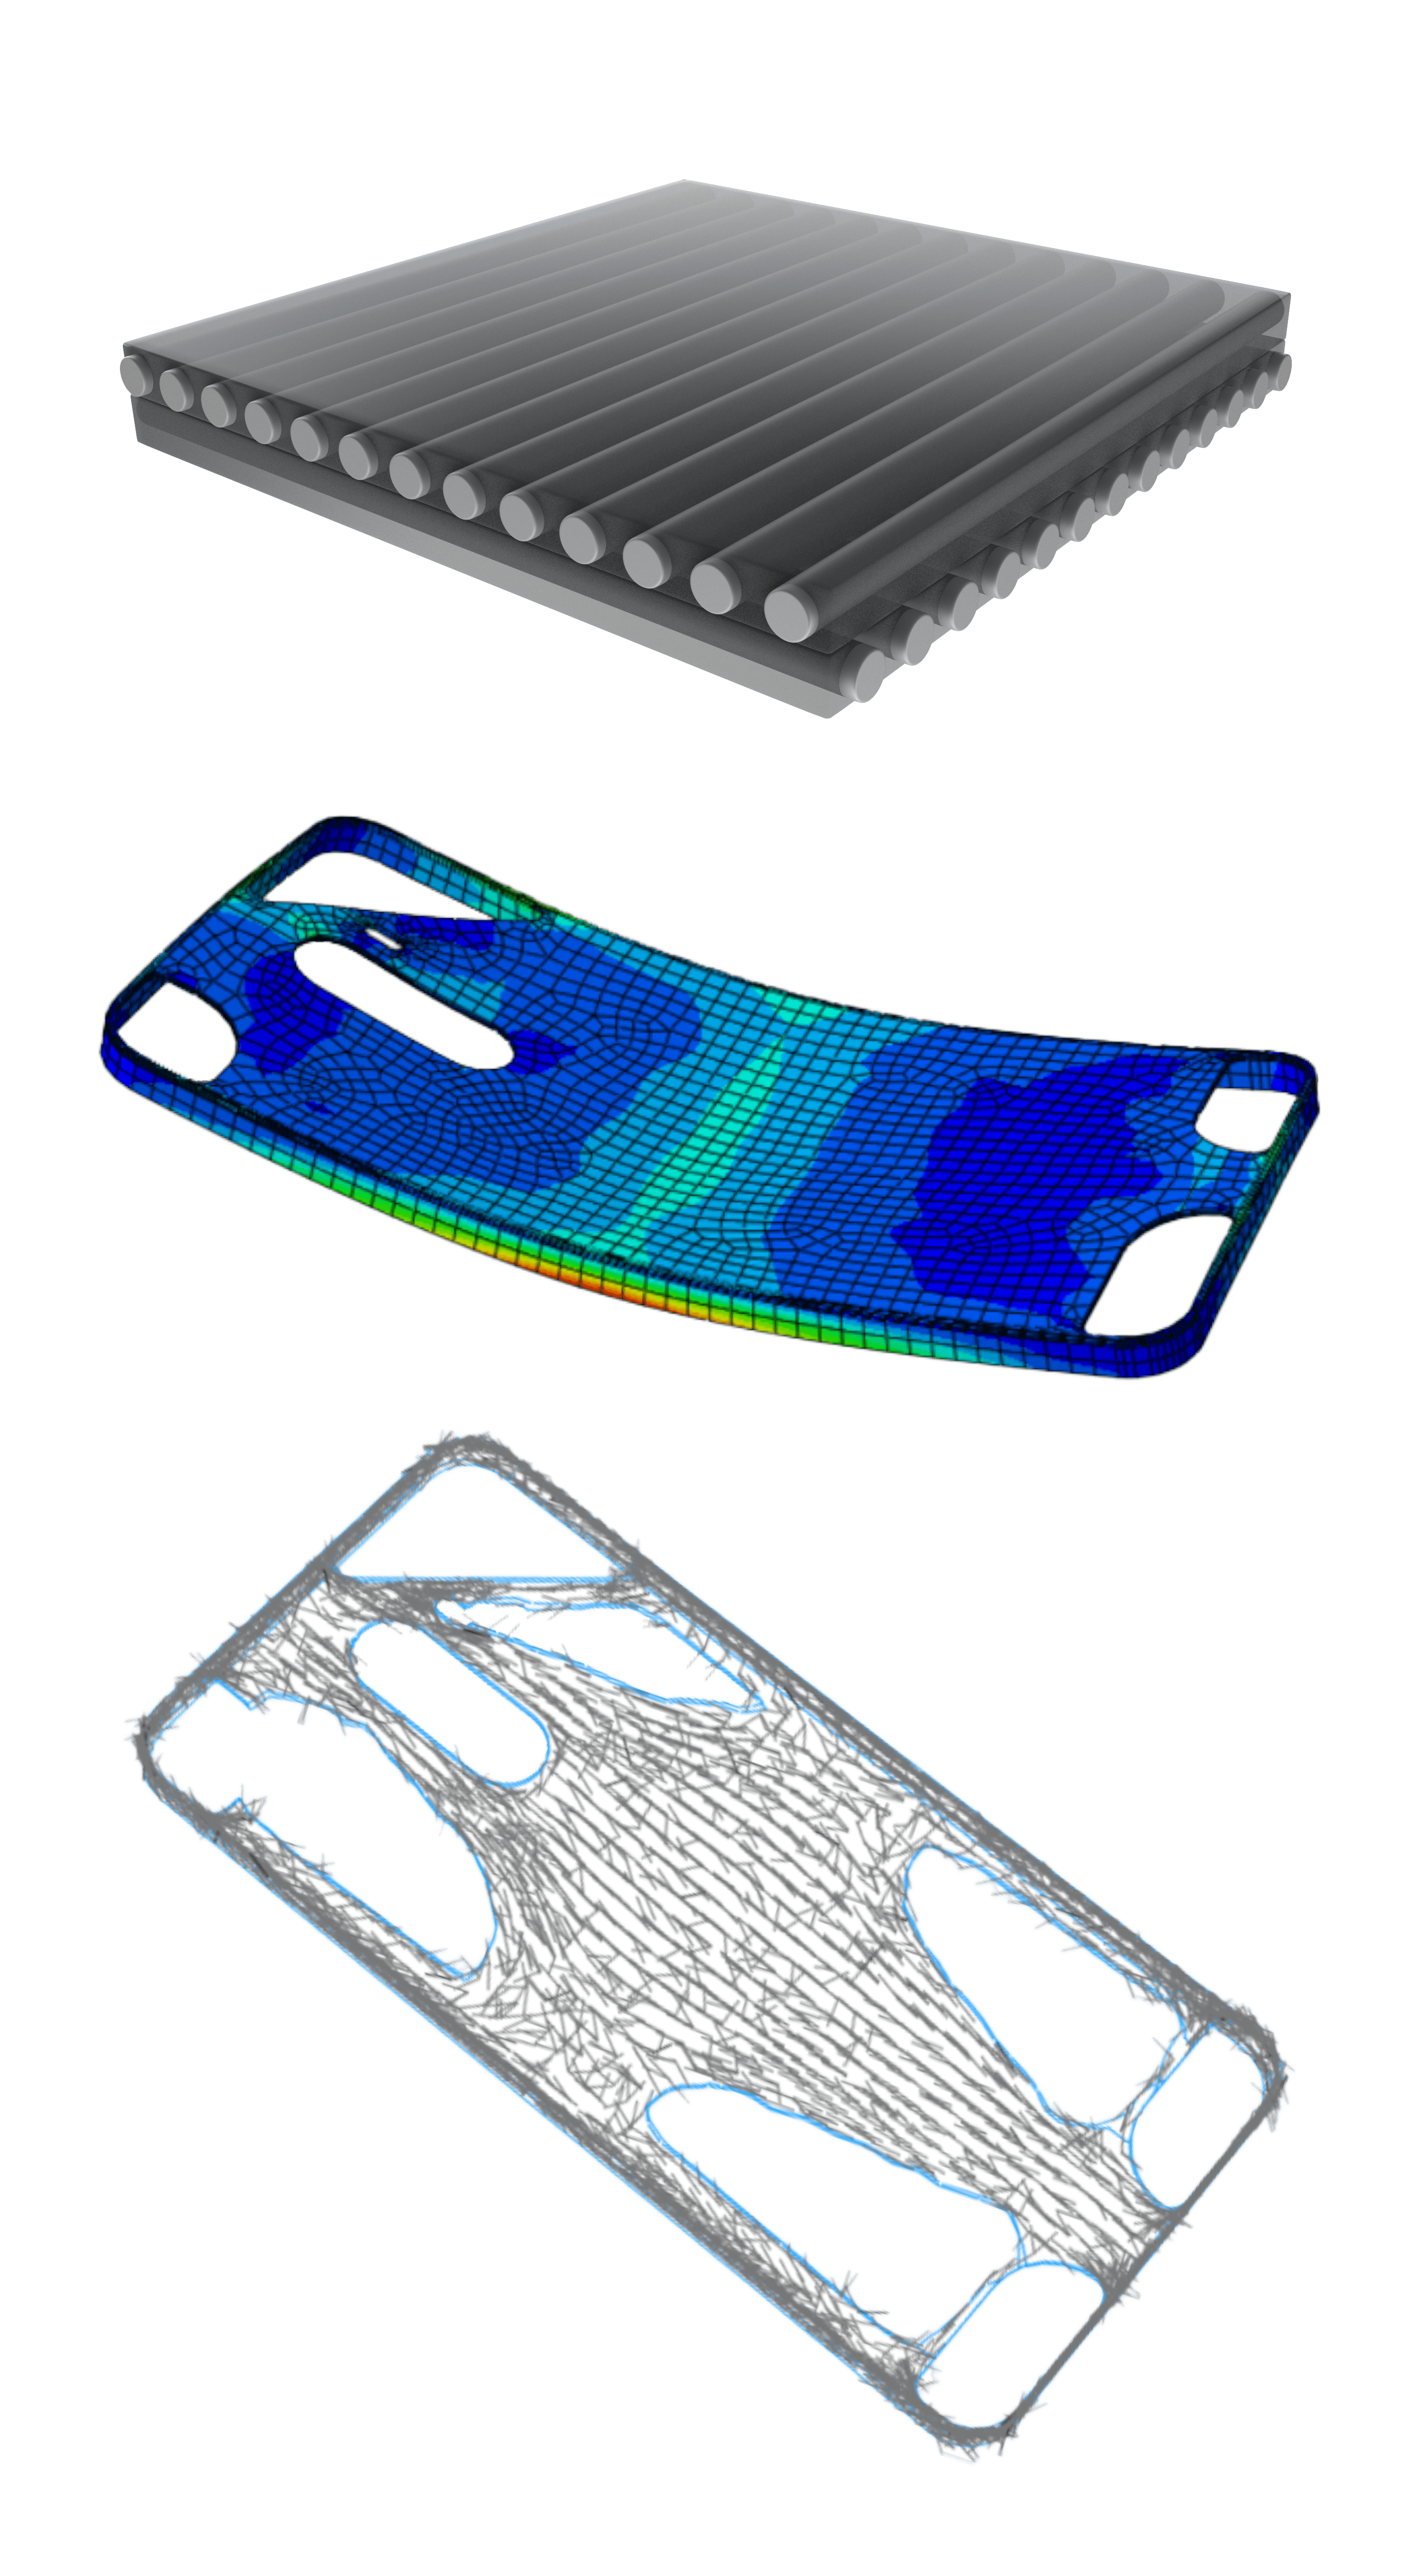 Cross-Ply Laminate and Render Image of Finite Element Analysis